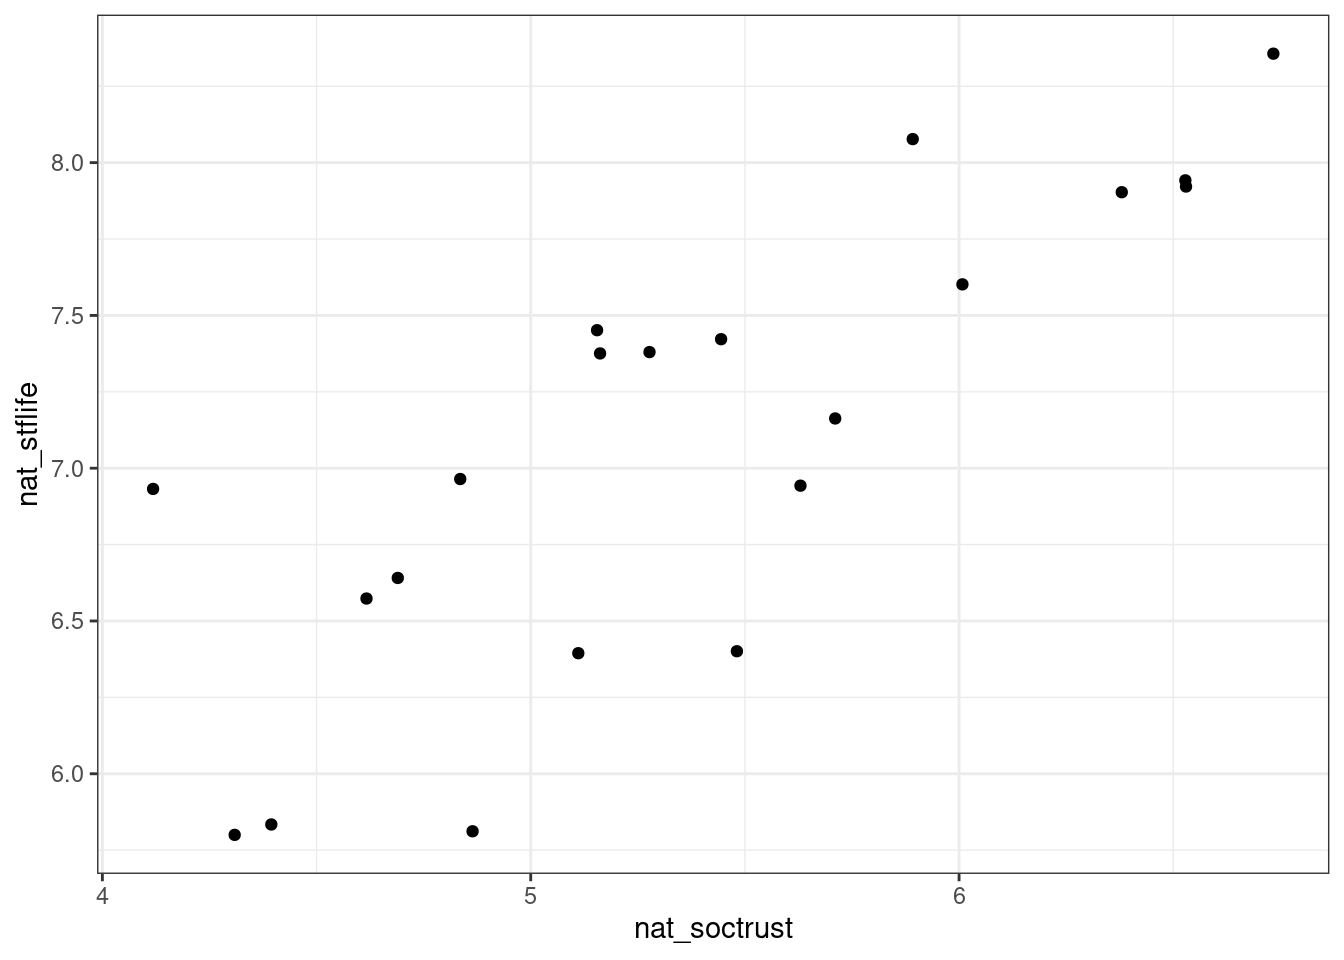 Scatterplot relating social trust to life satisfaction